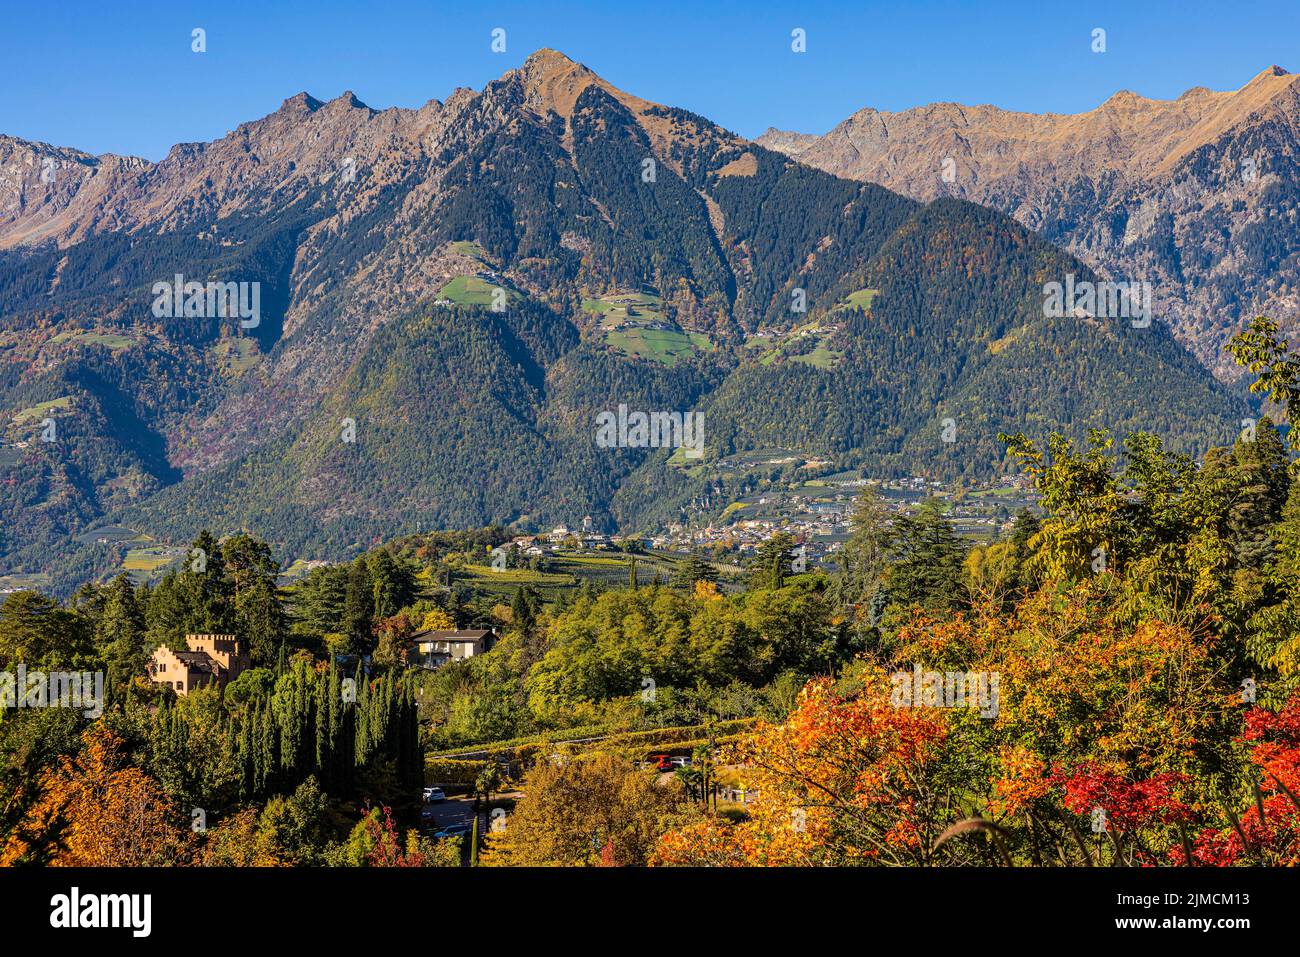 Autumn colours in the gardens of Trauttmansdorff Castle, in the background the Mutspitze, near Merano, South Tyrol, Italy, Europe Stock Photo